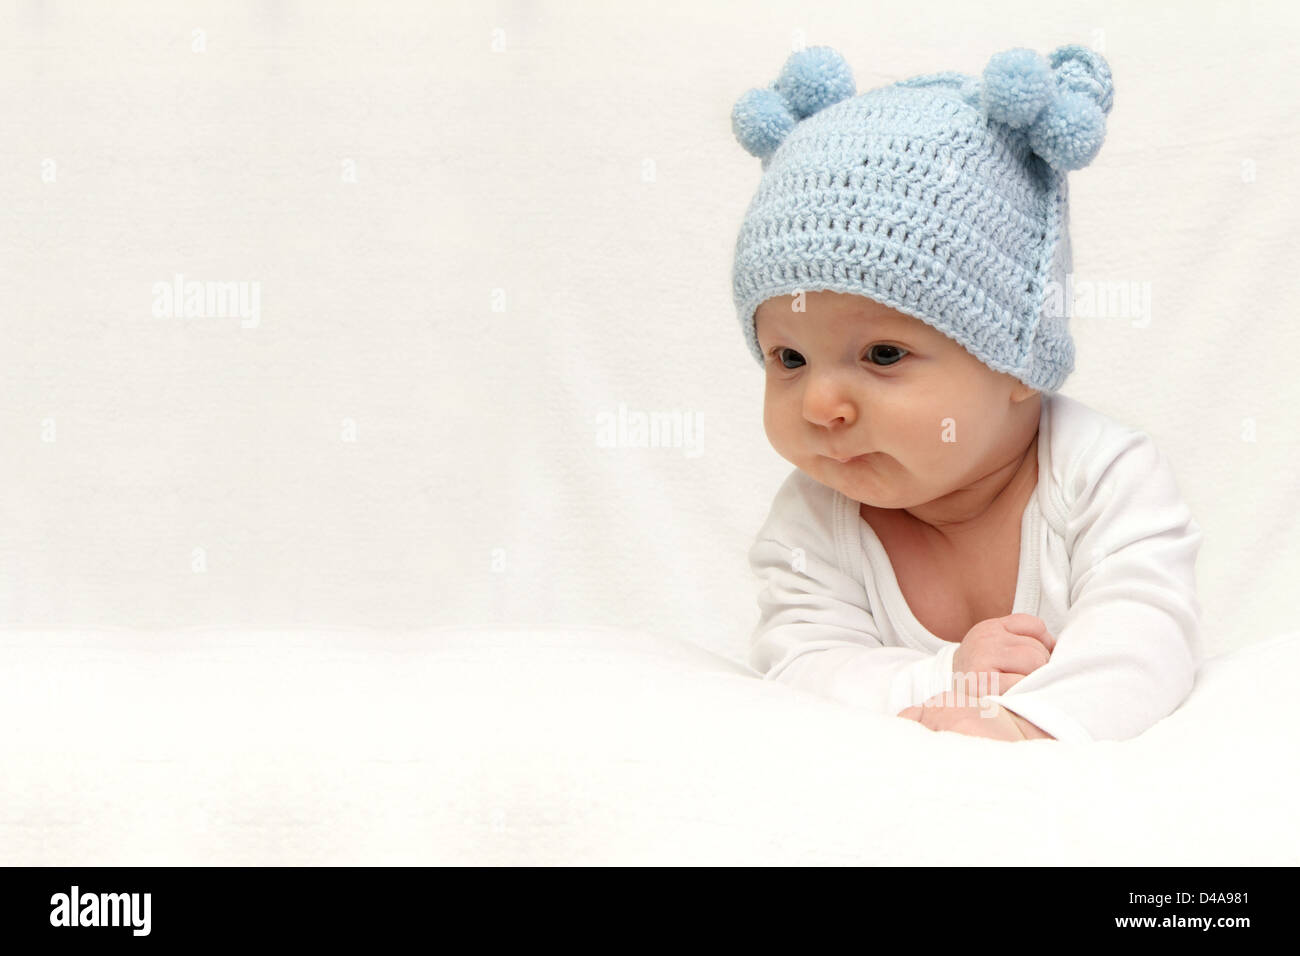 Beautiful baby in blue knitted hat Stock Photo